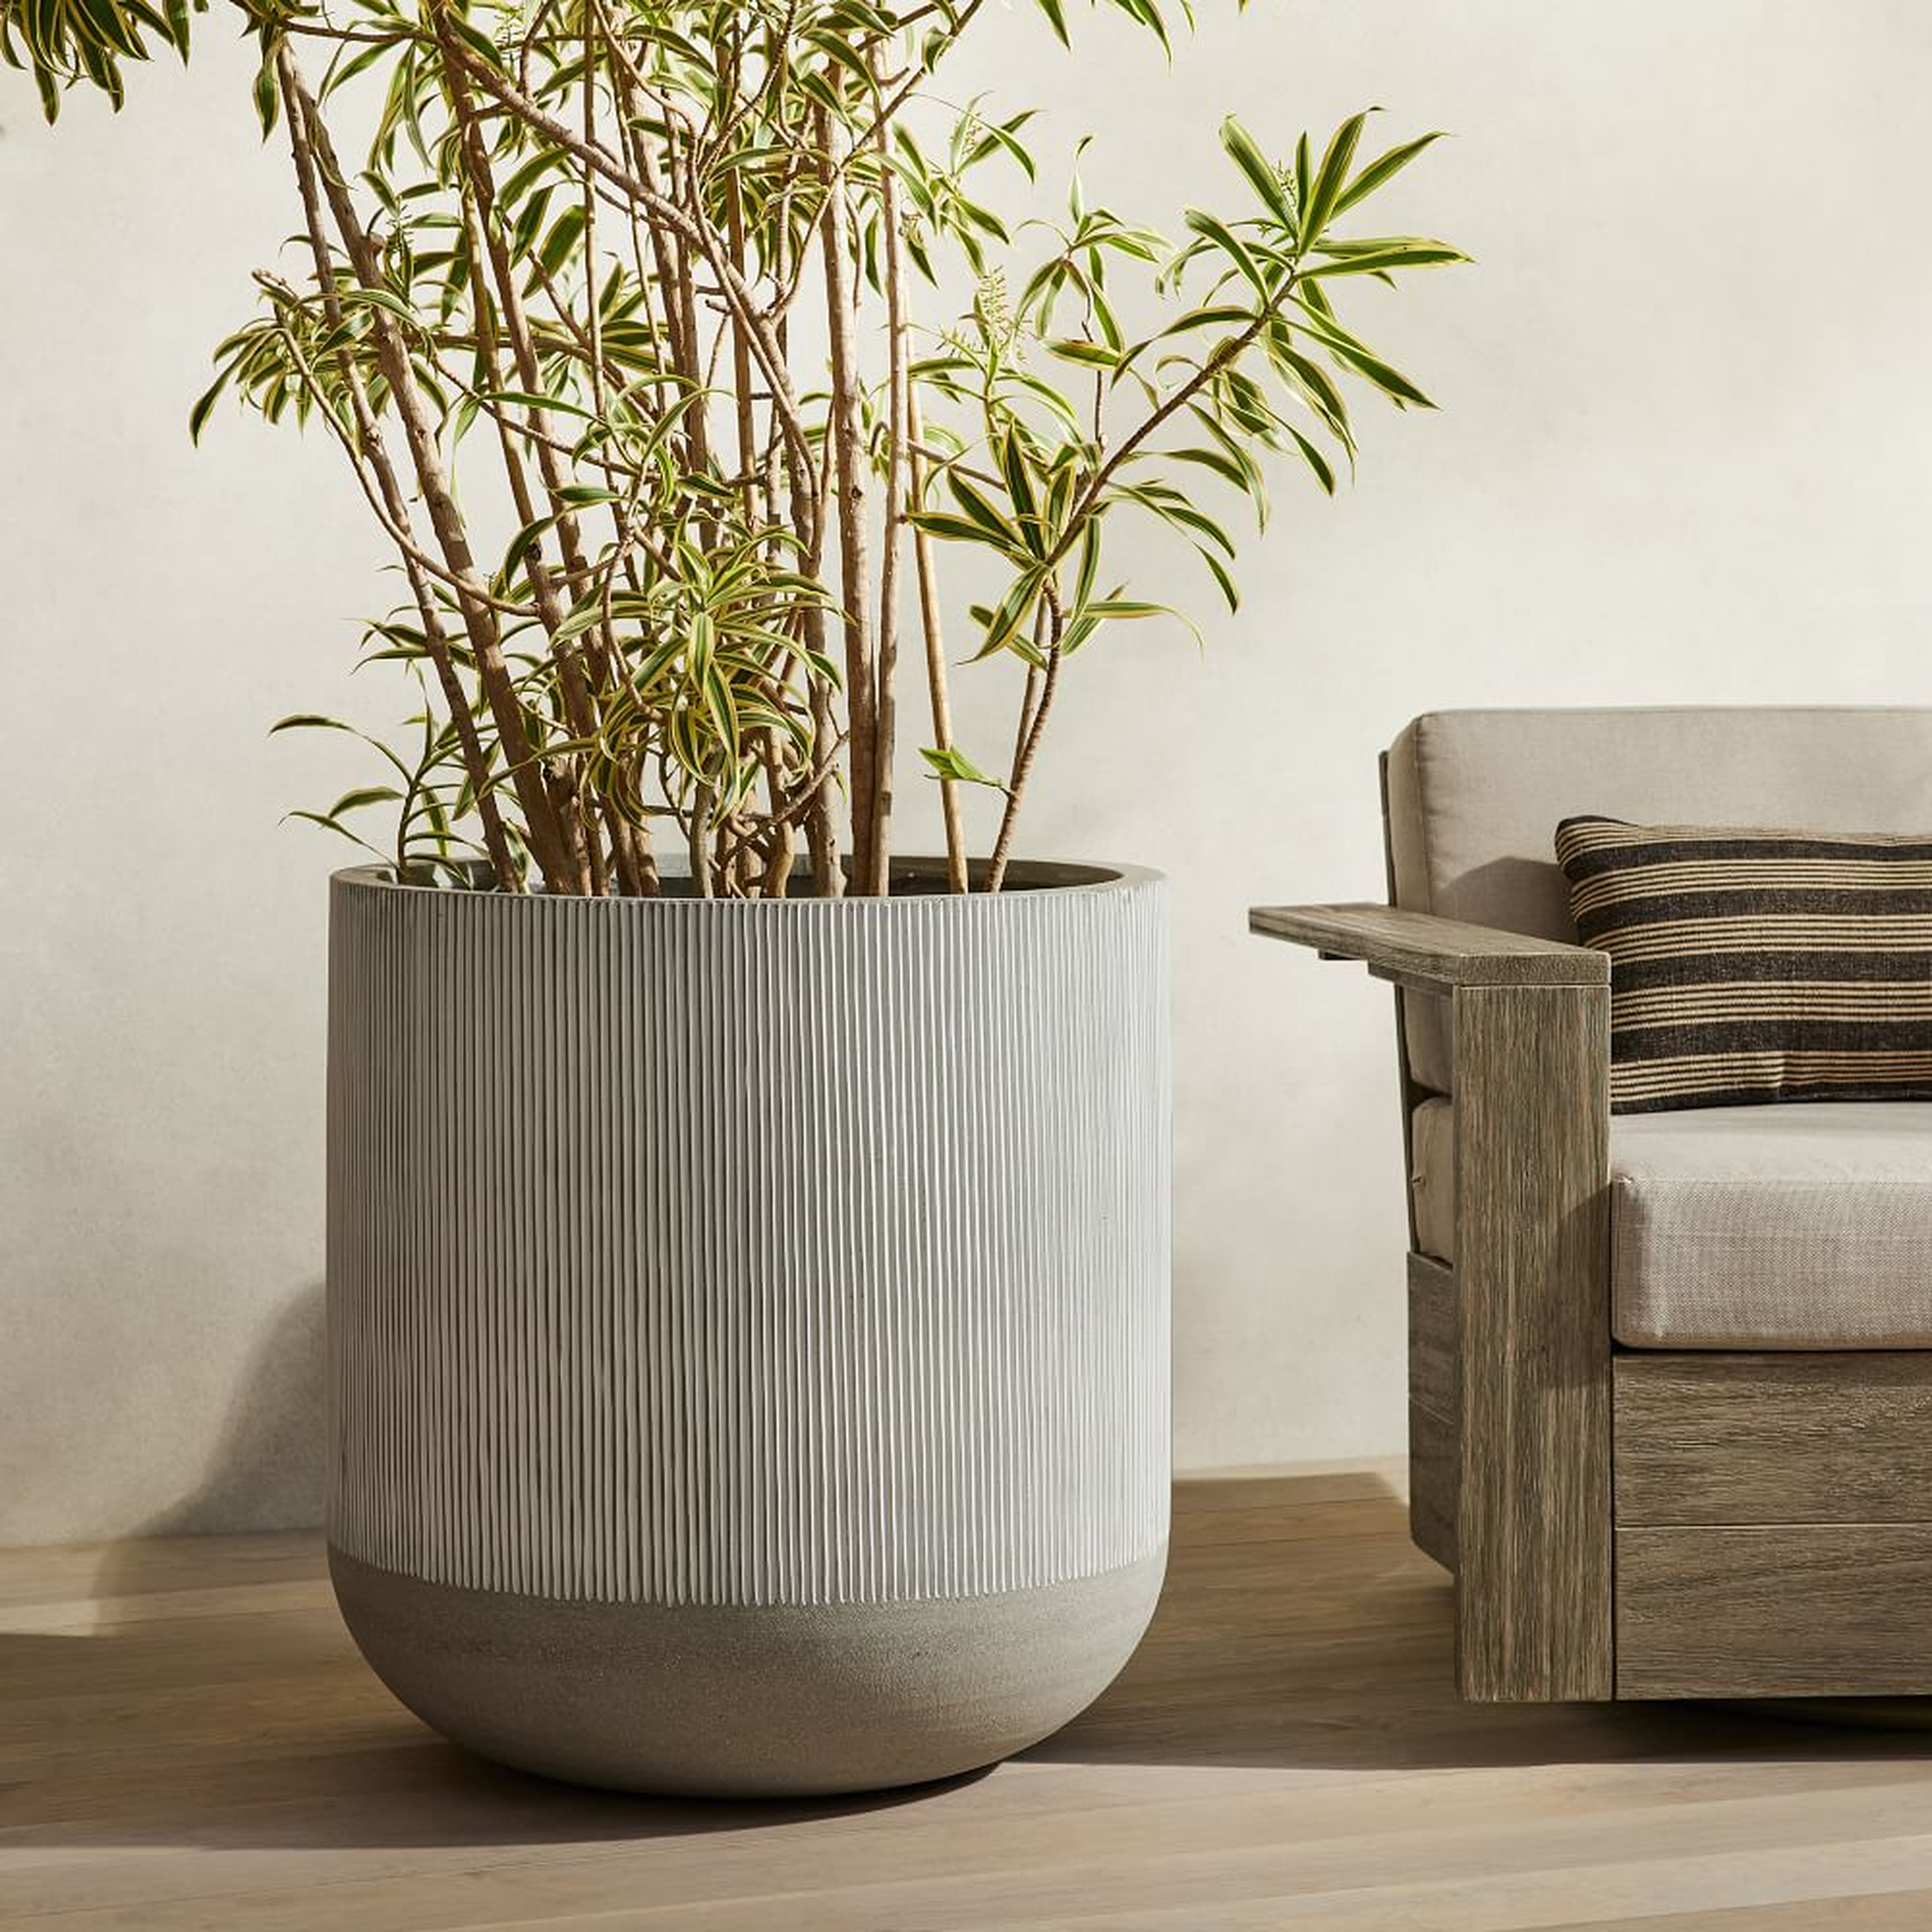 Textured Radius Ficonstone Indoor/Outdoor Planter, Extra Large, 25.6"D x 26.8"H, Frost Gray - West Elm